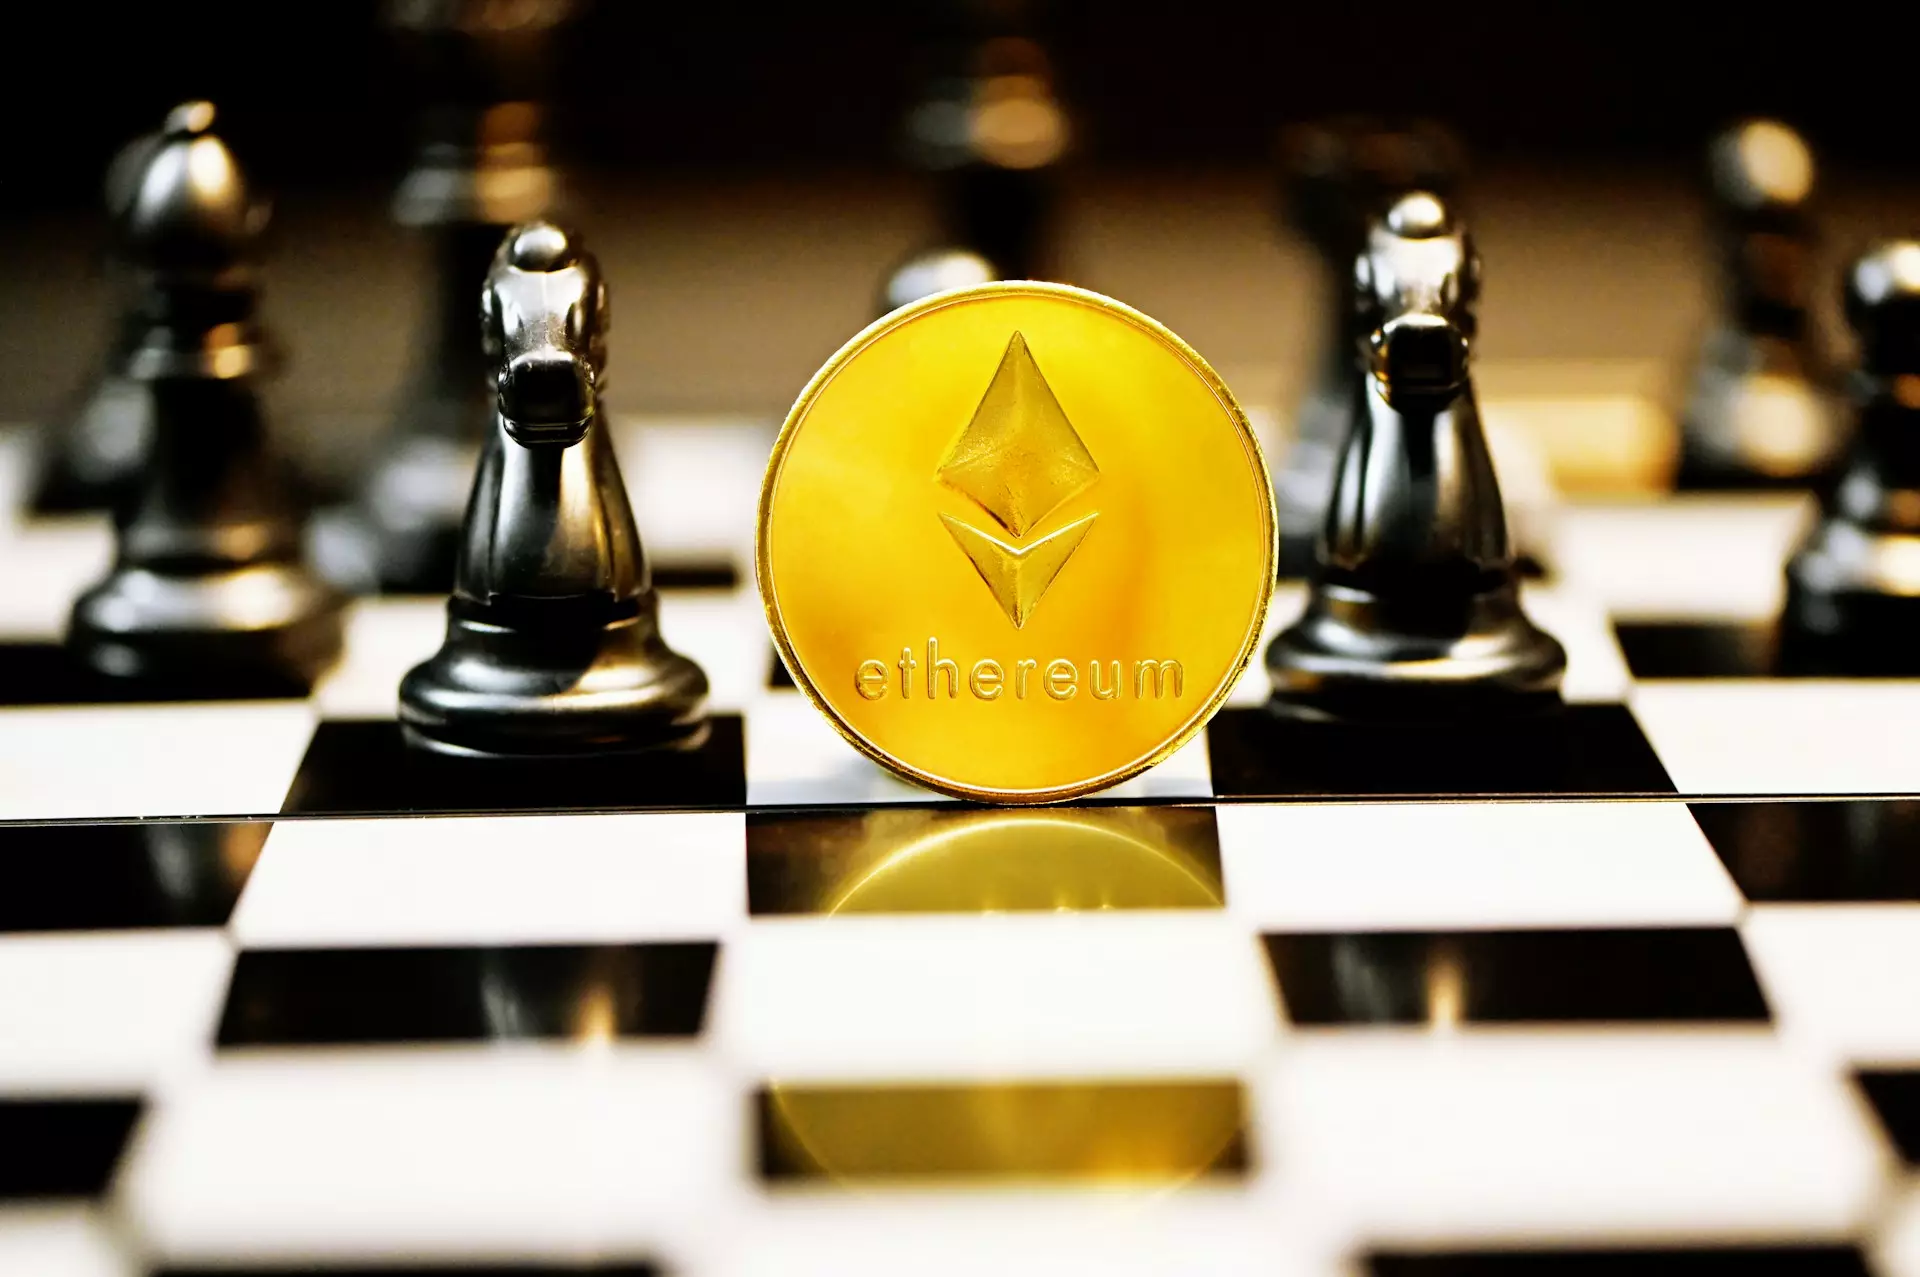 Analysis of Ethereum’s Price Rally After Bitcoin Hits New All-Time High